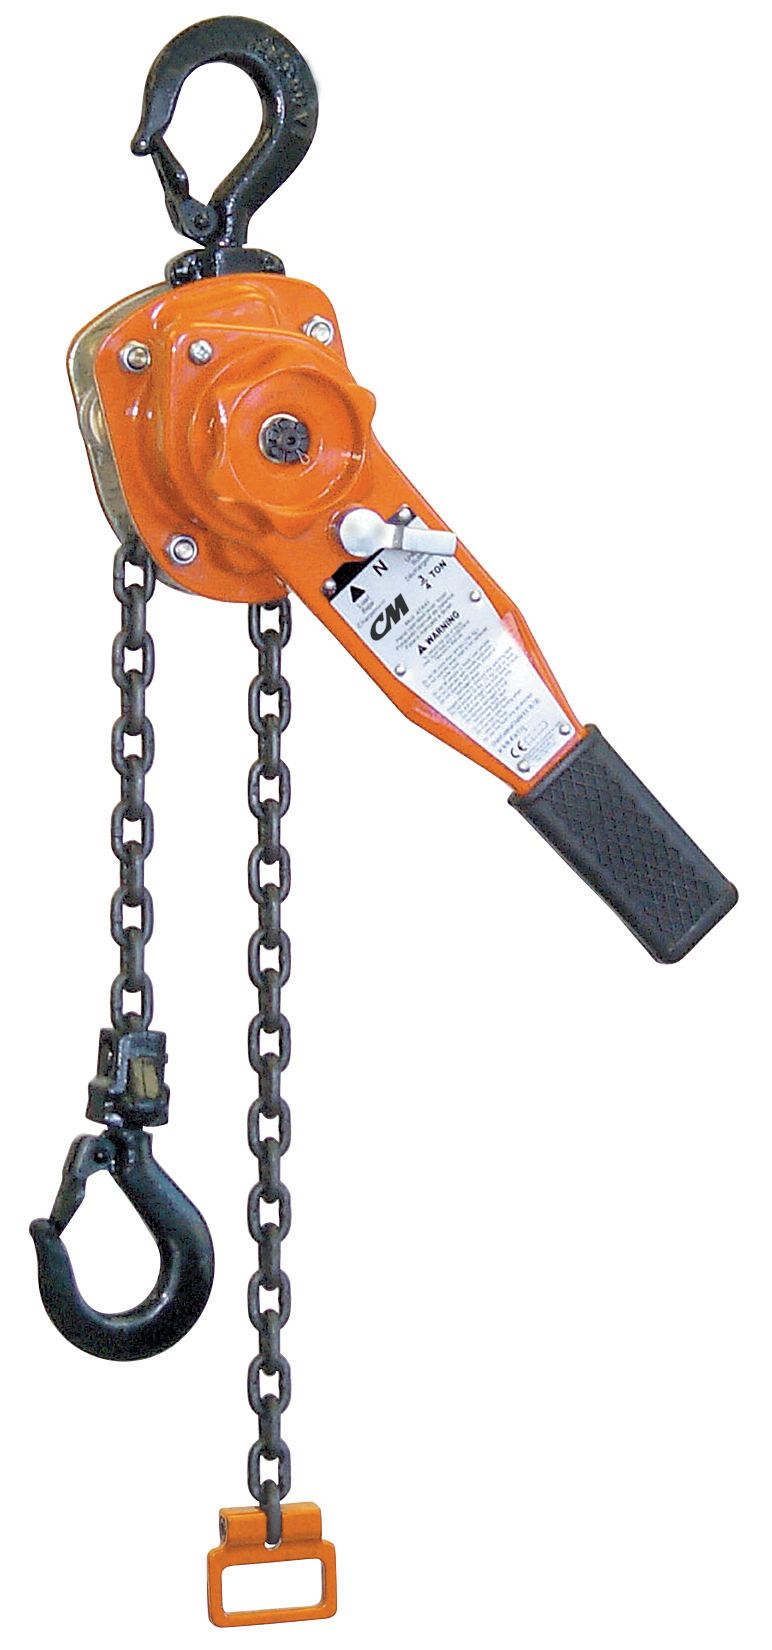 Manual Lever Hoist Come Along 0.75 TON /1650 LBS 10 Feet Lift Steel Chain with Heavy Duty Hooks Industrial Grade Steel for Lifting Pulling Building Garages Warehouse Litake Lever Chain Hoist 